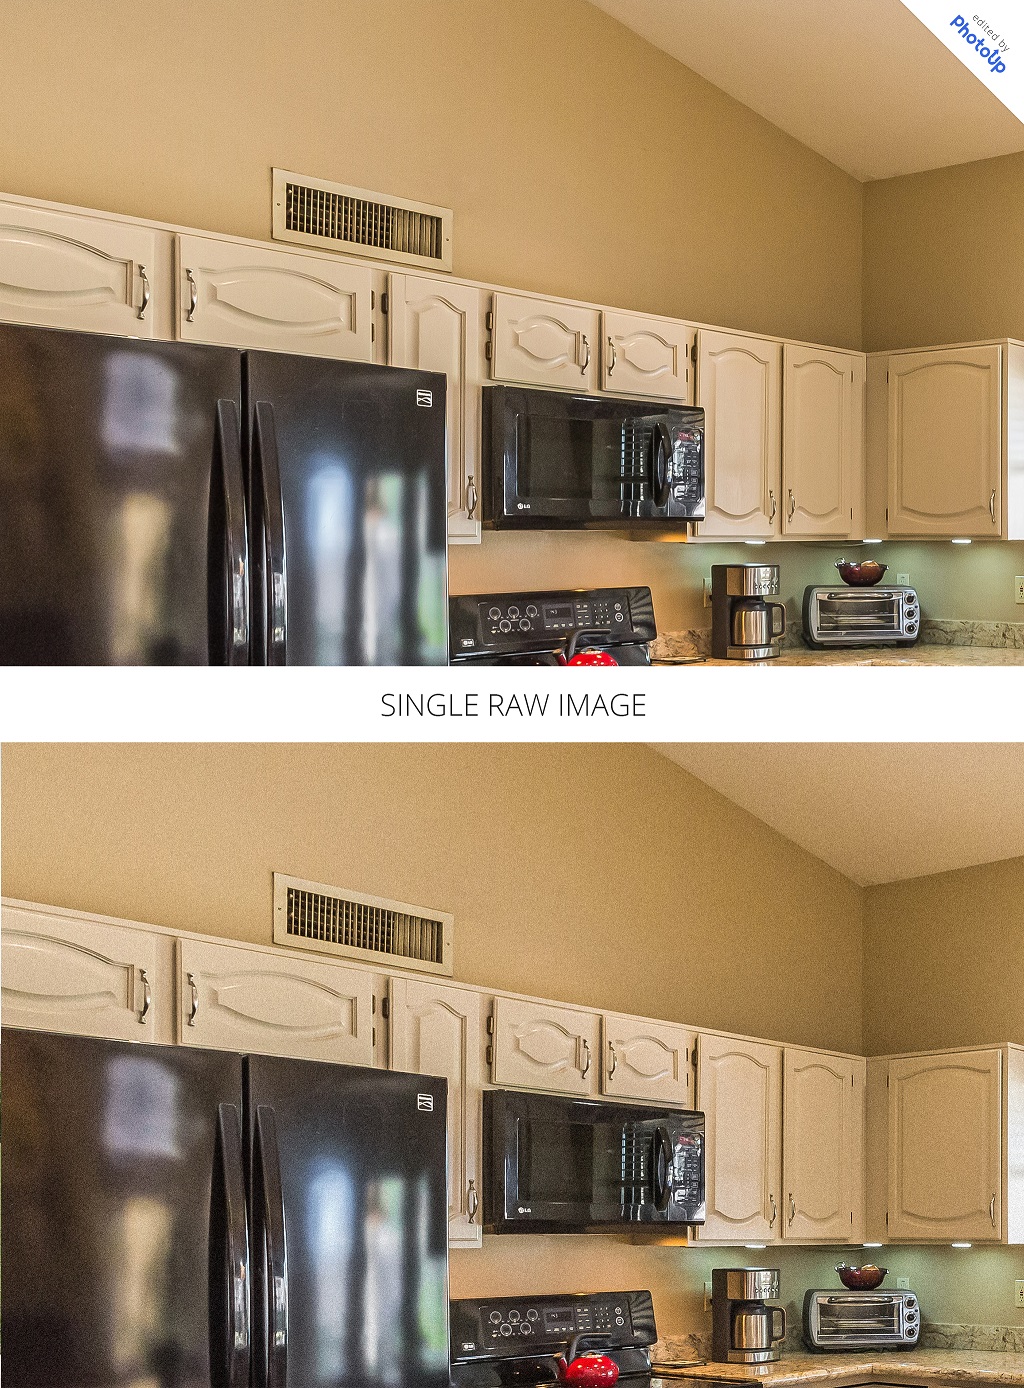 How To Reduce Noise In Your Real Estate Images